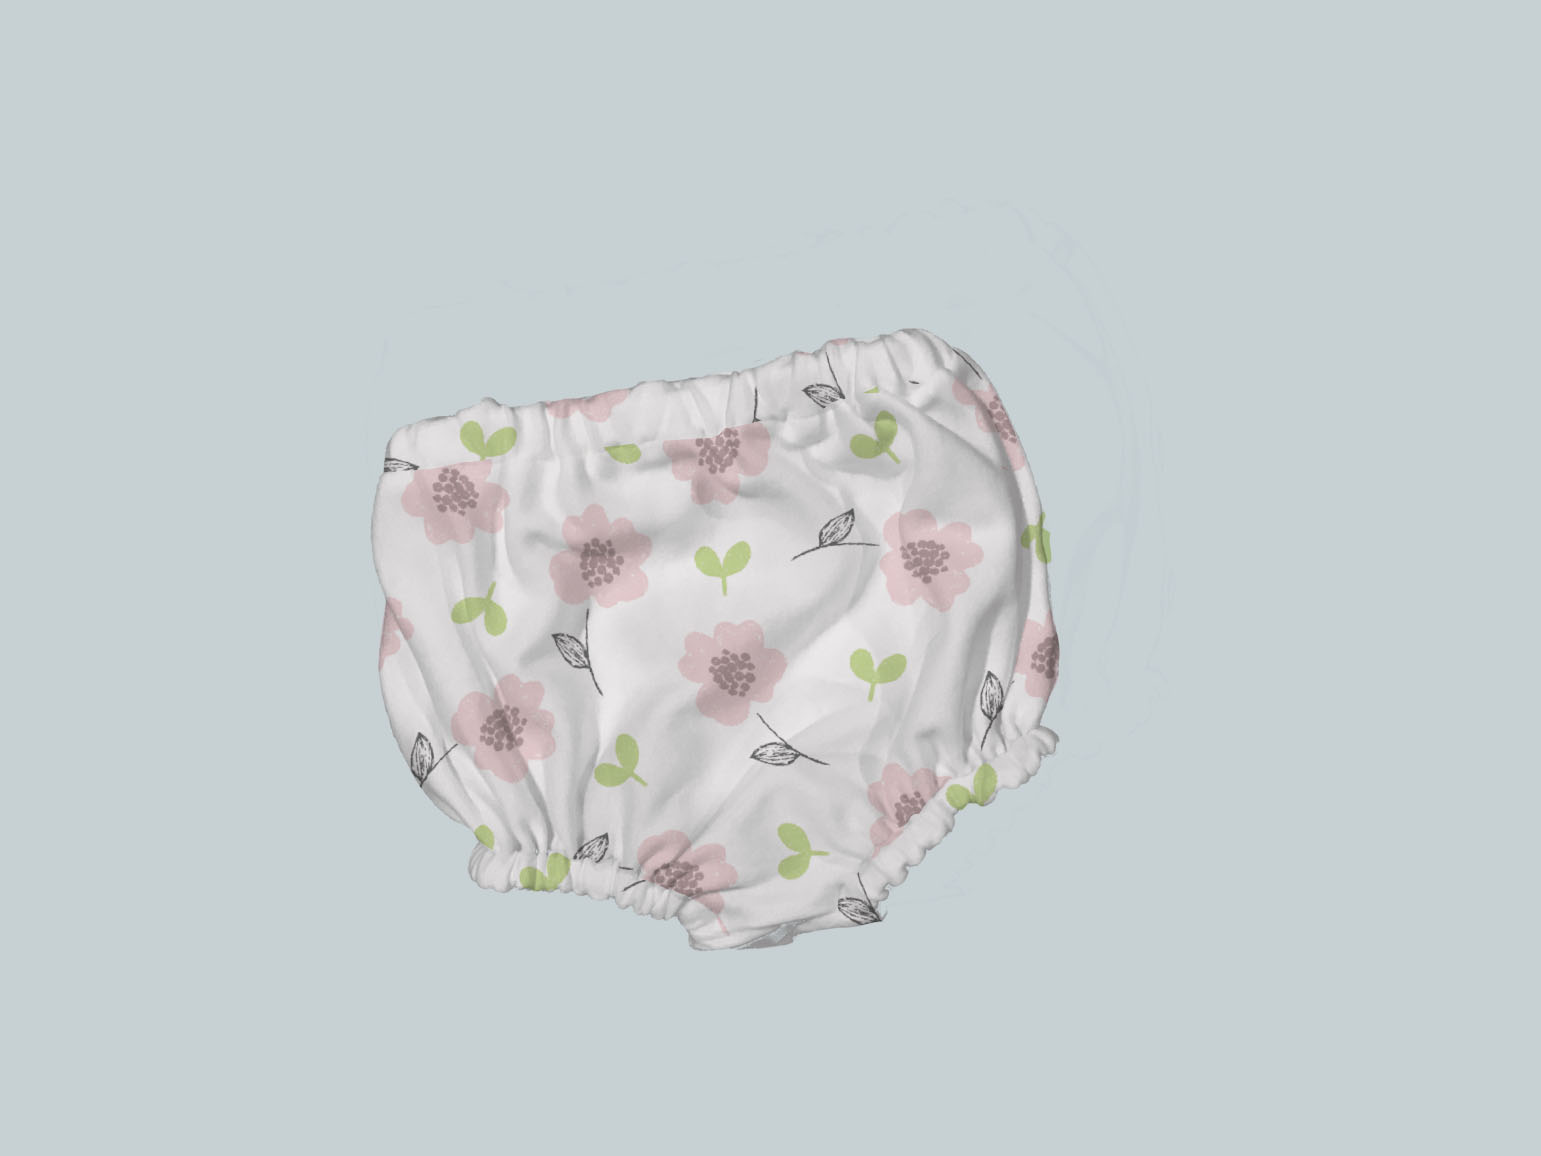 Bummies/Diaper Cover - Dainty Pink Flowers